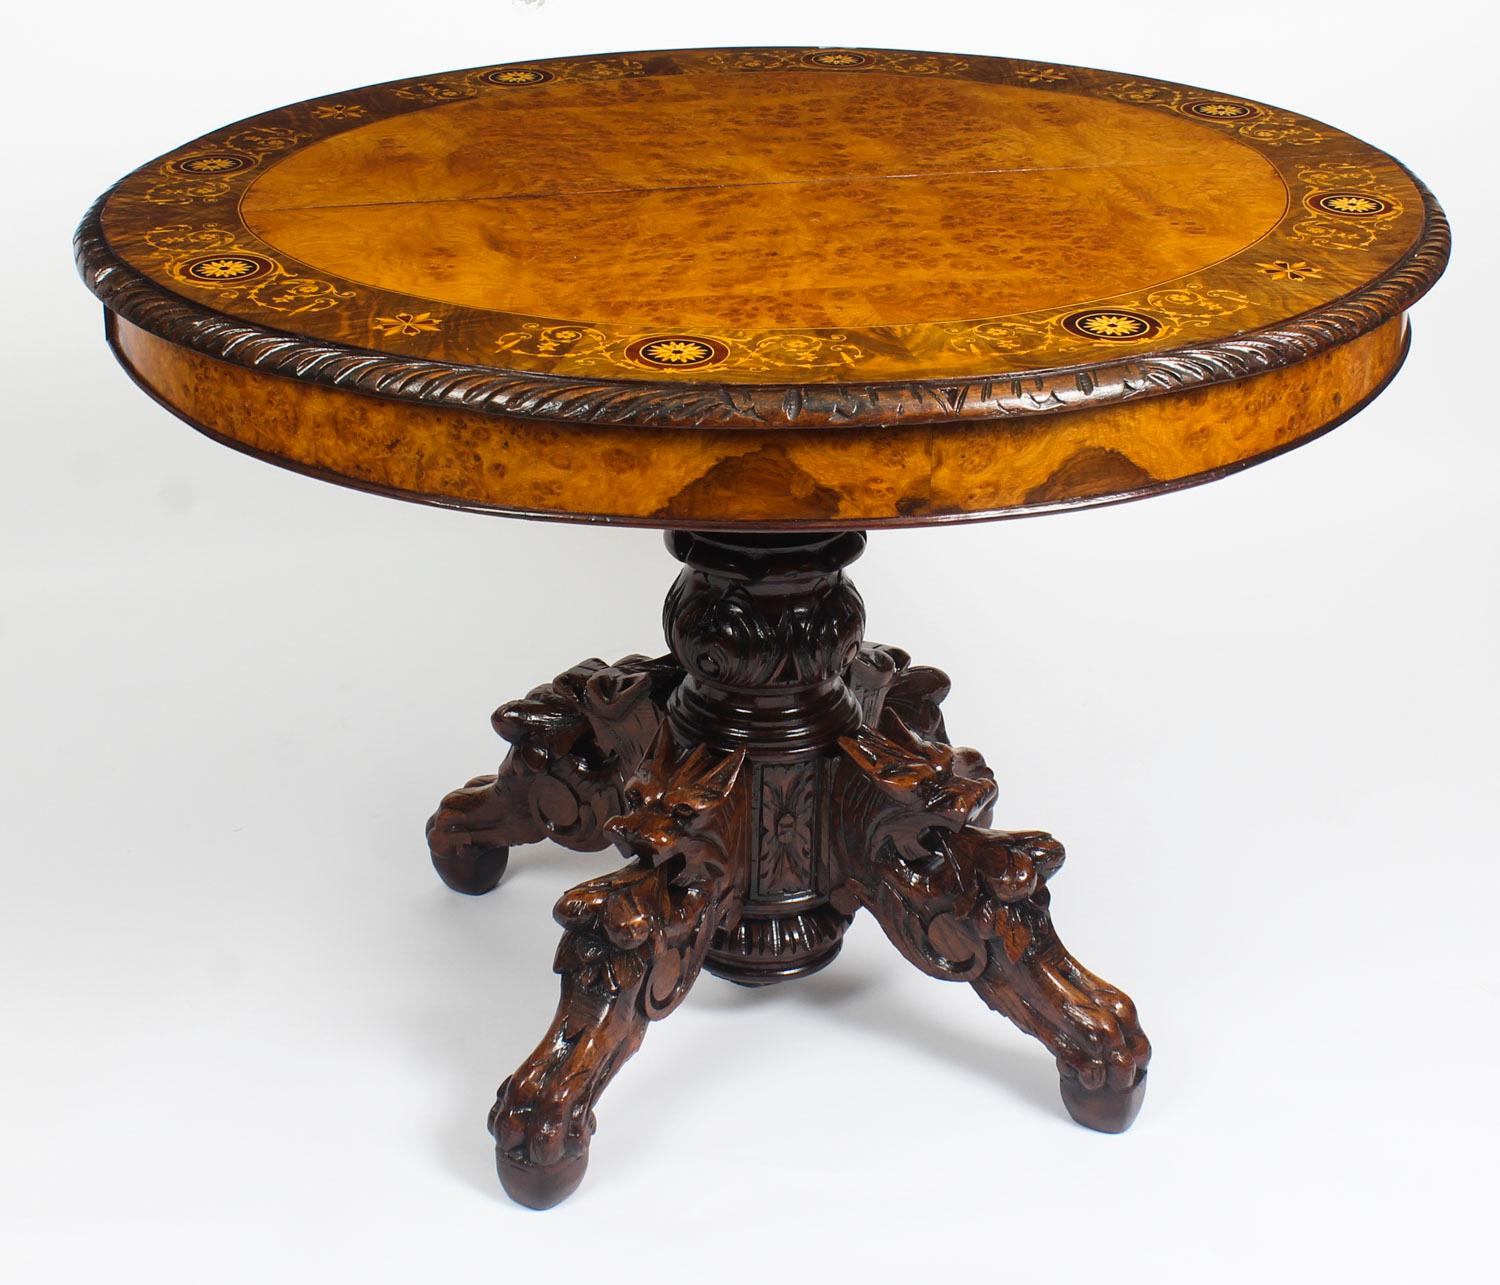 English Antique Pollard Oak and Marquetry Oval Victorian Dining Table, 19th Century